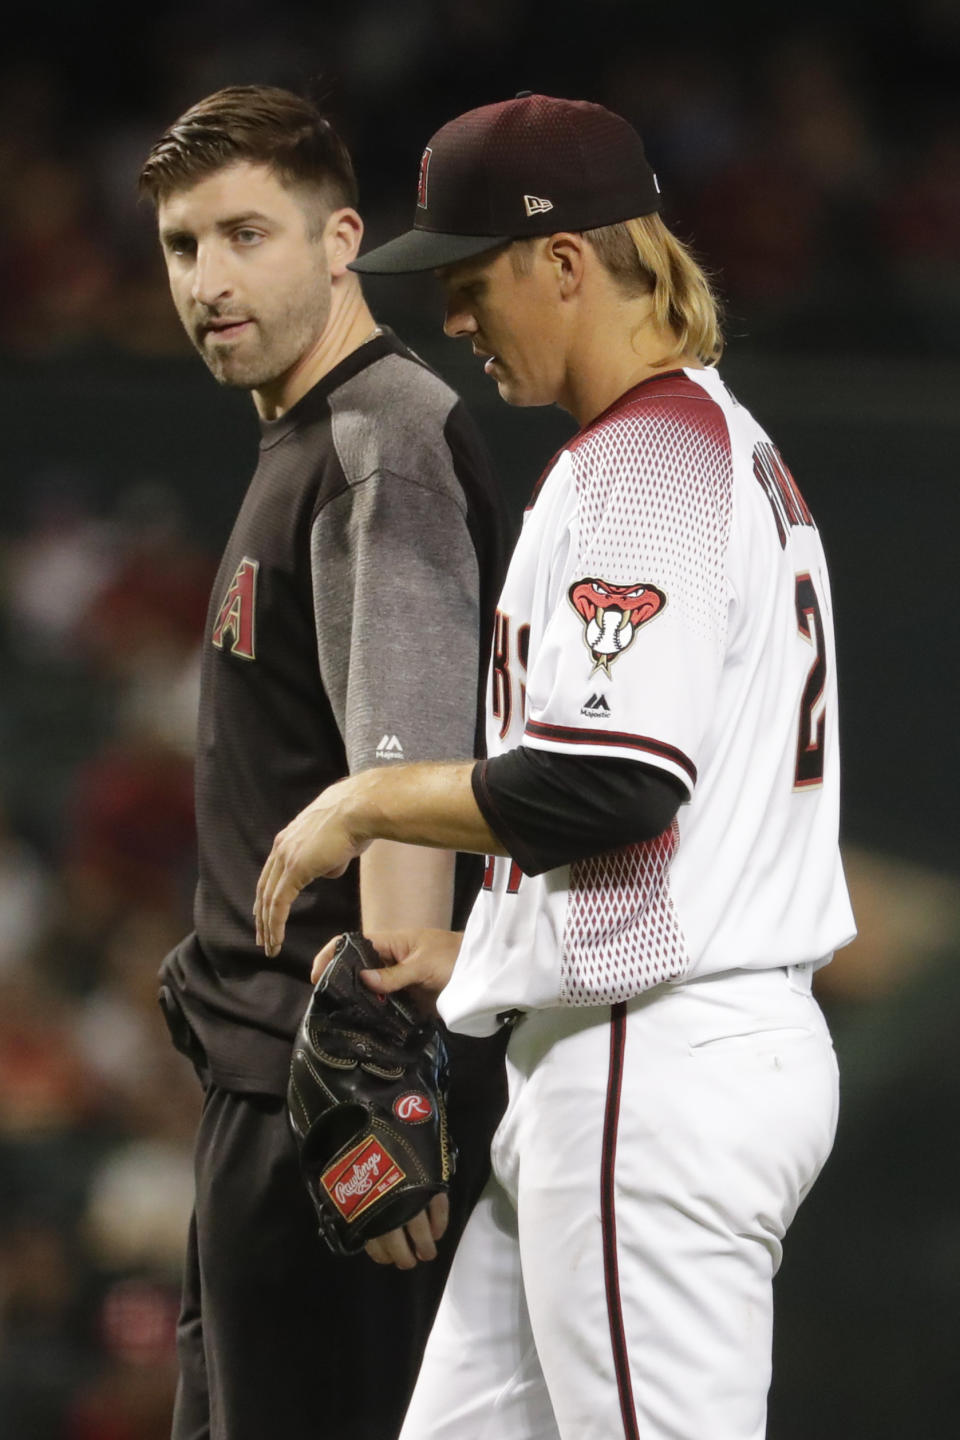 Arizona Diamondbacks starting pitcher Zack Greinke leaves the field with a trainer during the eighth inning of a baseball game against the Pittsburgh Pirates in Phoenix, Wednesday, May 15, 2019. (AP Photo/Matt York)